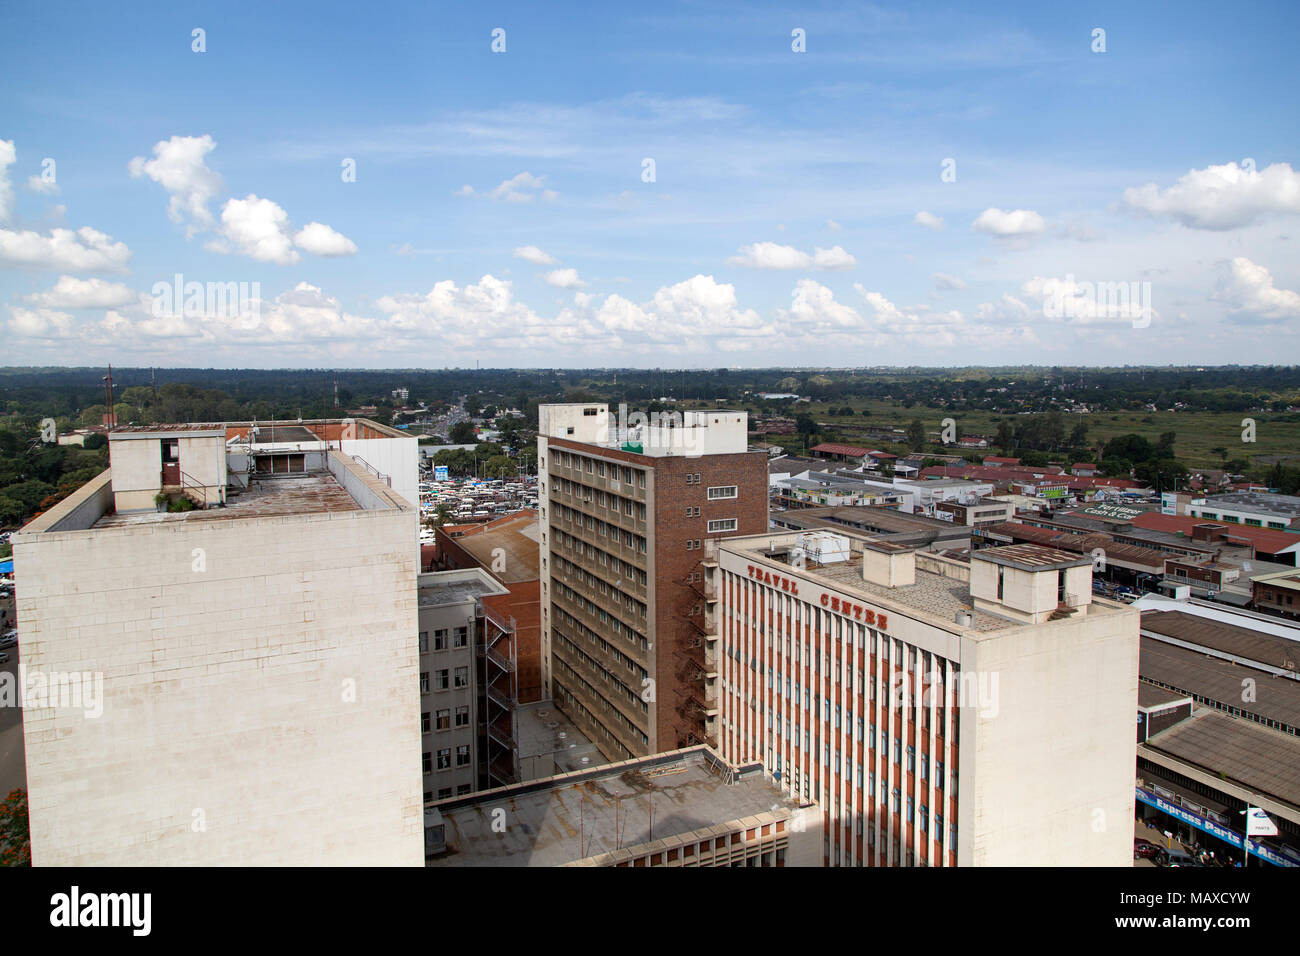 Buildings in central Harare, Zimbabwe. The sky over the Zimbabwean capital is blue. Stock Photo